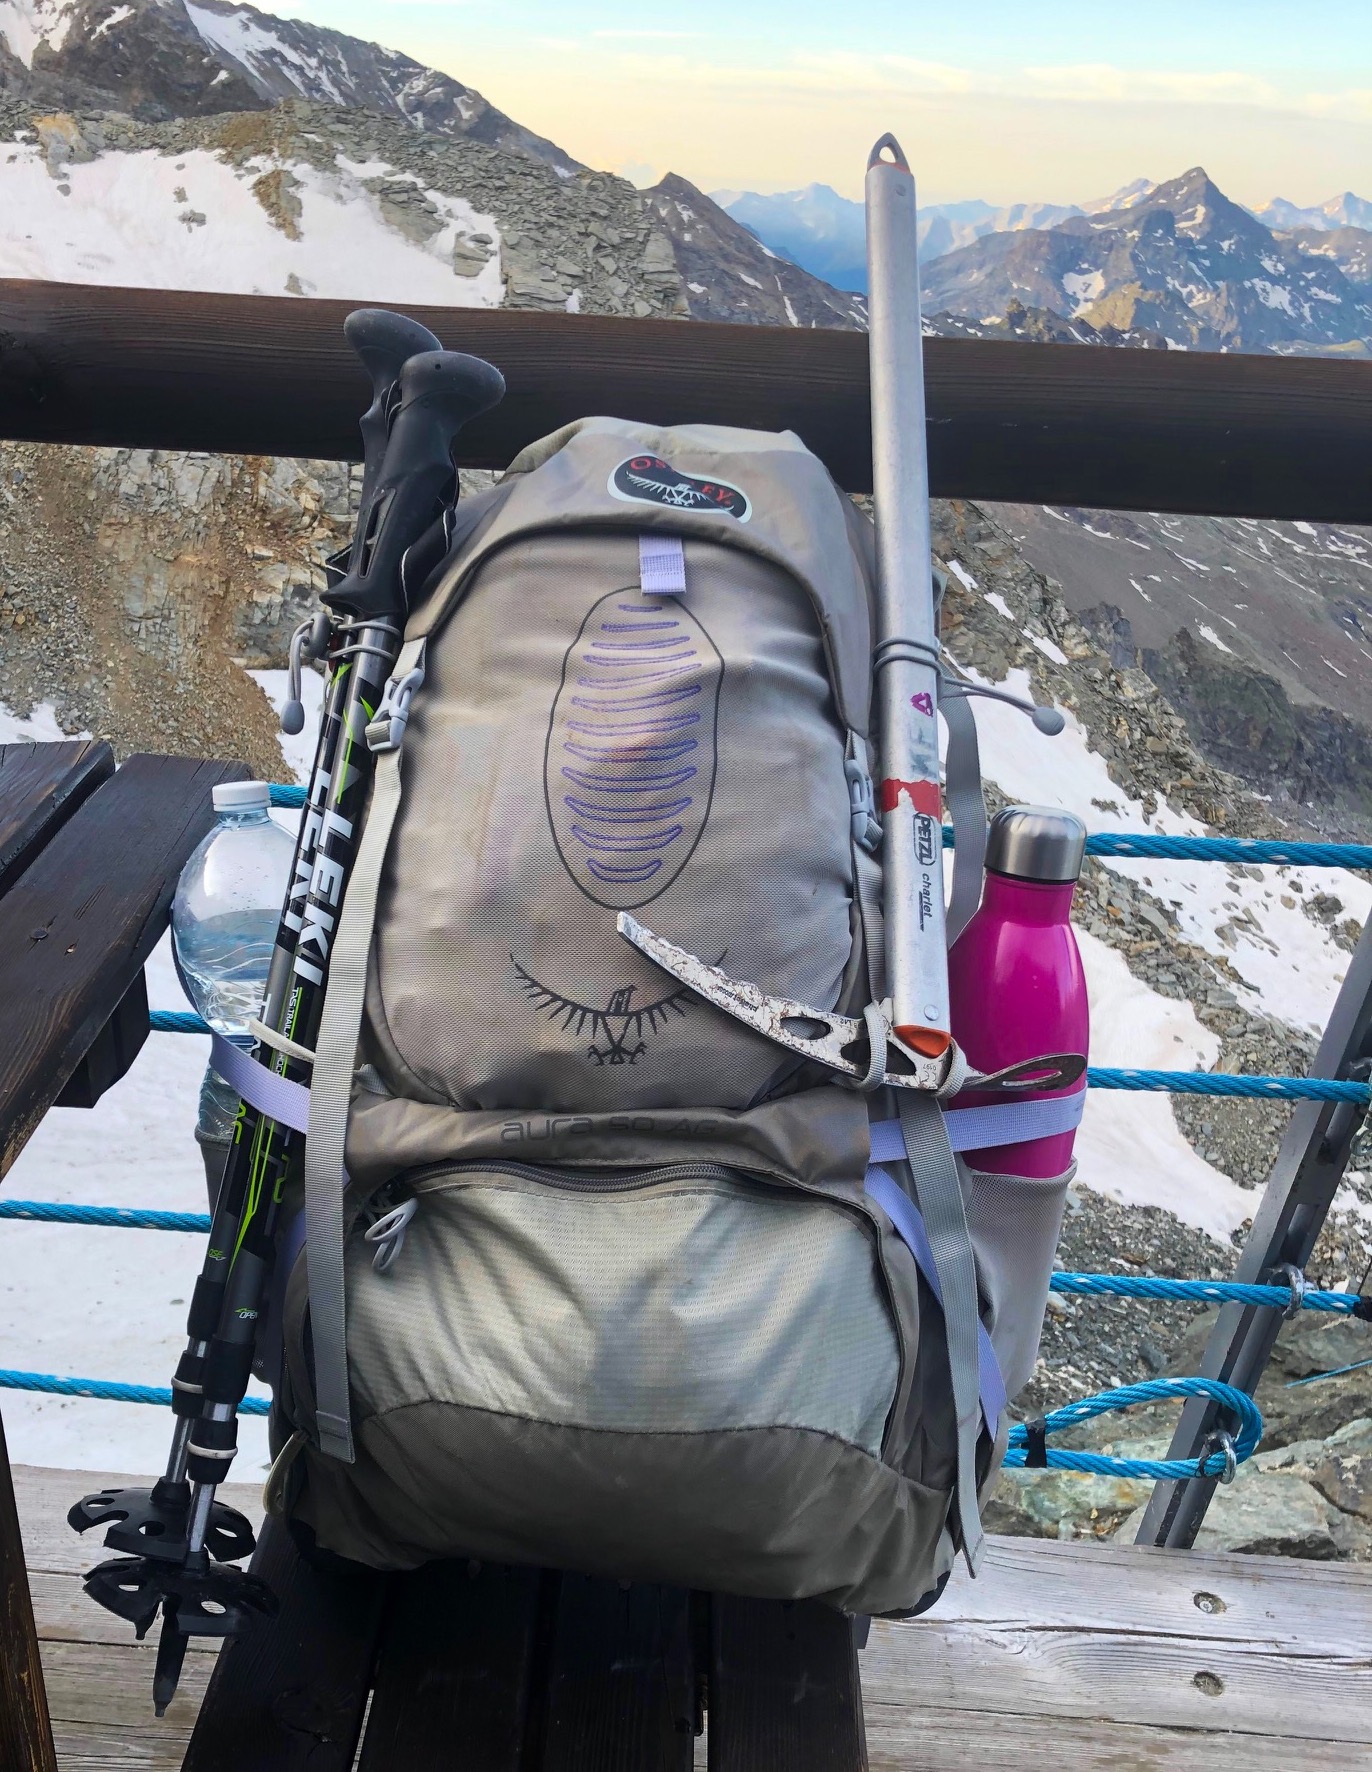 Osprey Aura Anti Gravity Rucksack with mountains in the background. Attached to the rucksack is an ice axe and walking poles, and a pink water bottle is in the side pocket.